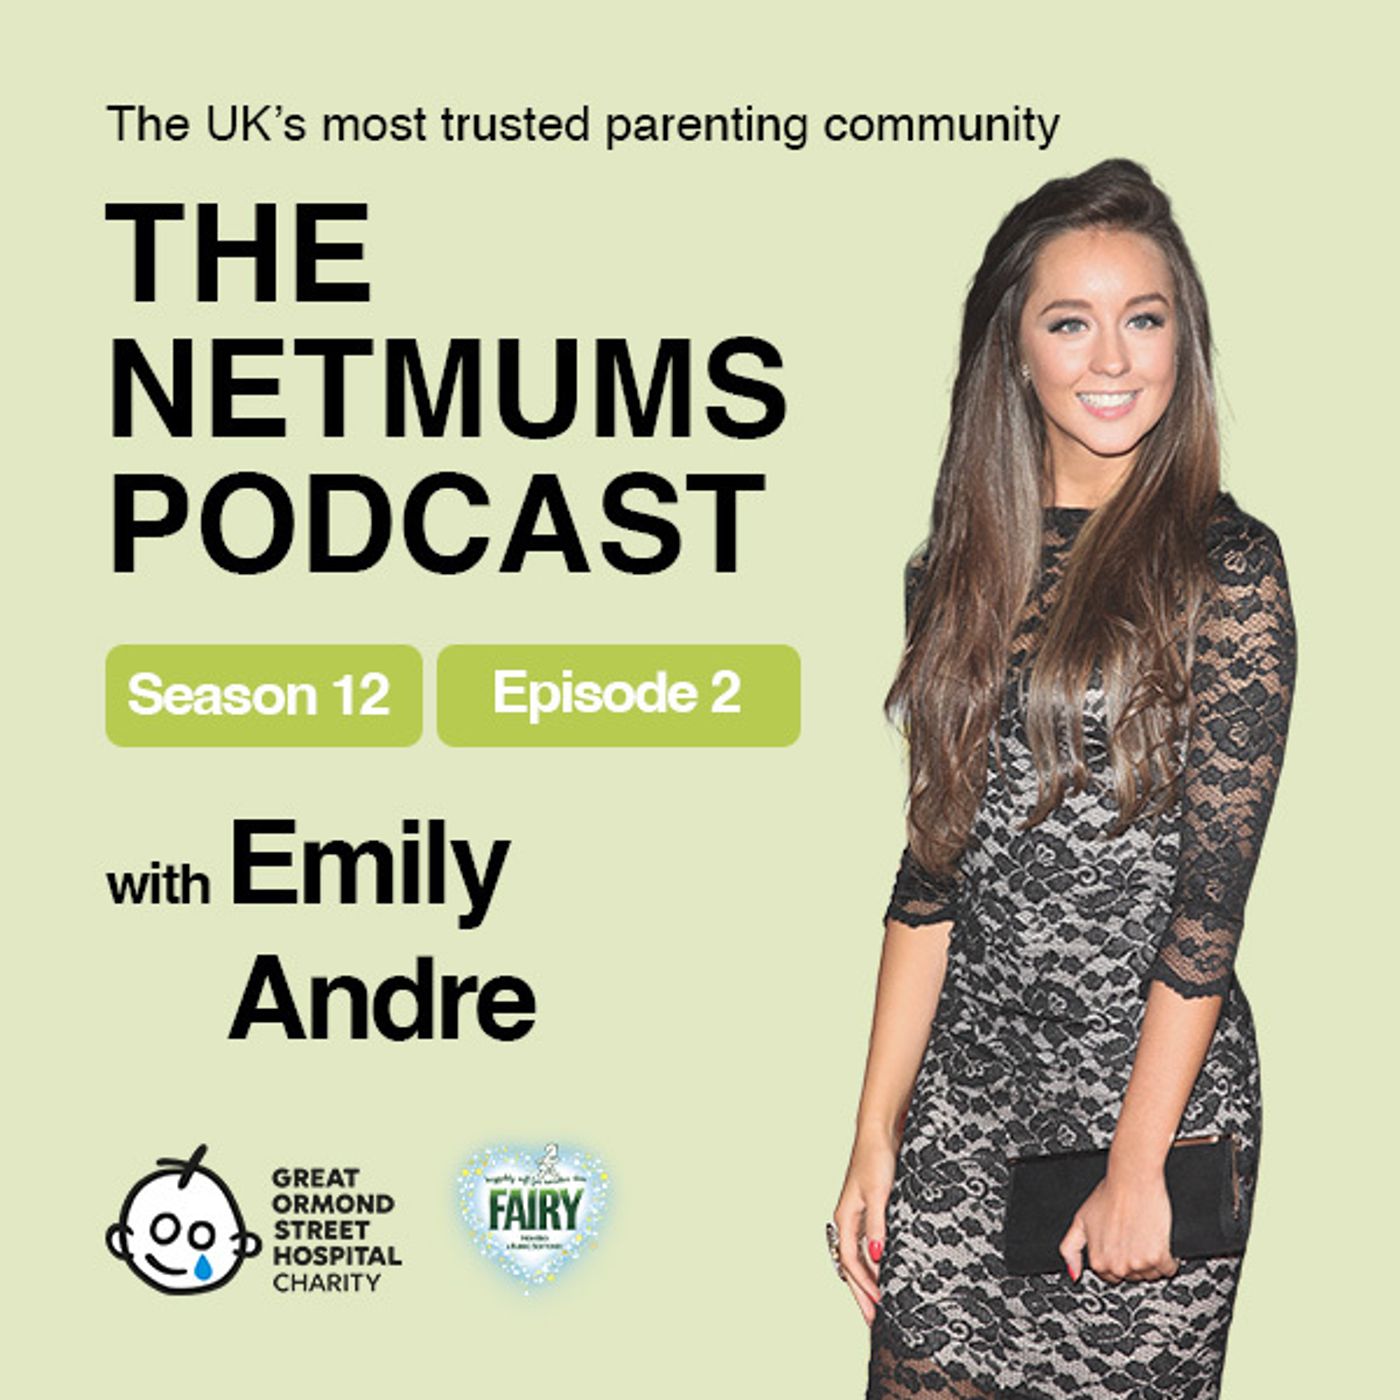 S12 Ep2: Brushing up on parenting with Emily Andre